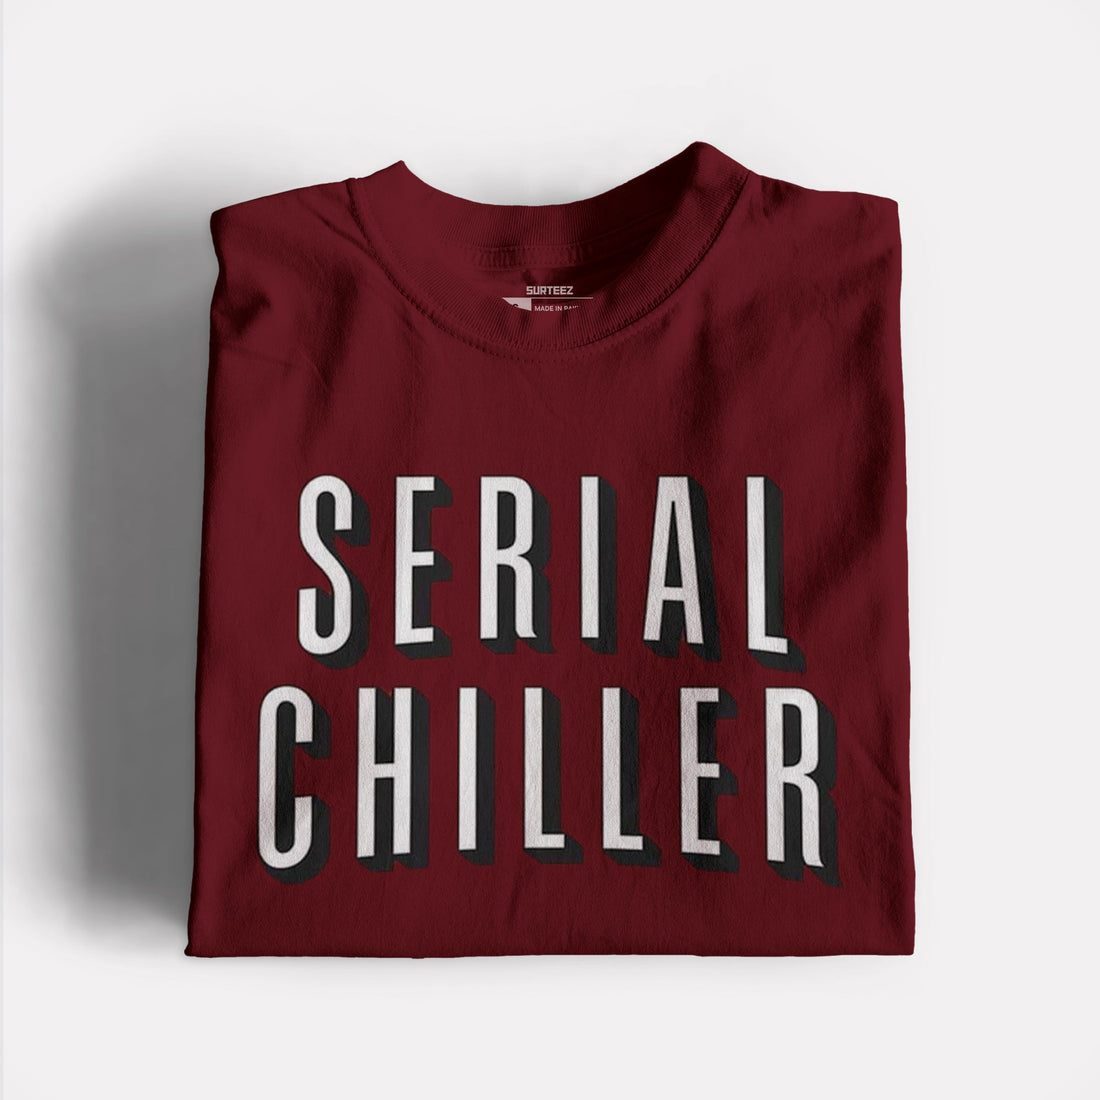 Serial Chiller Graphic Tshirt